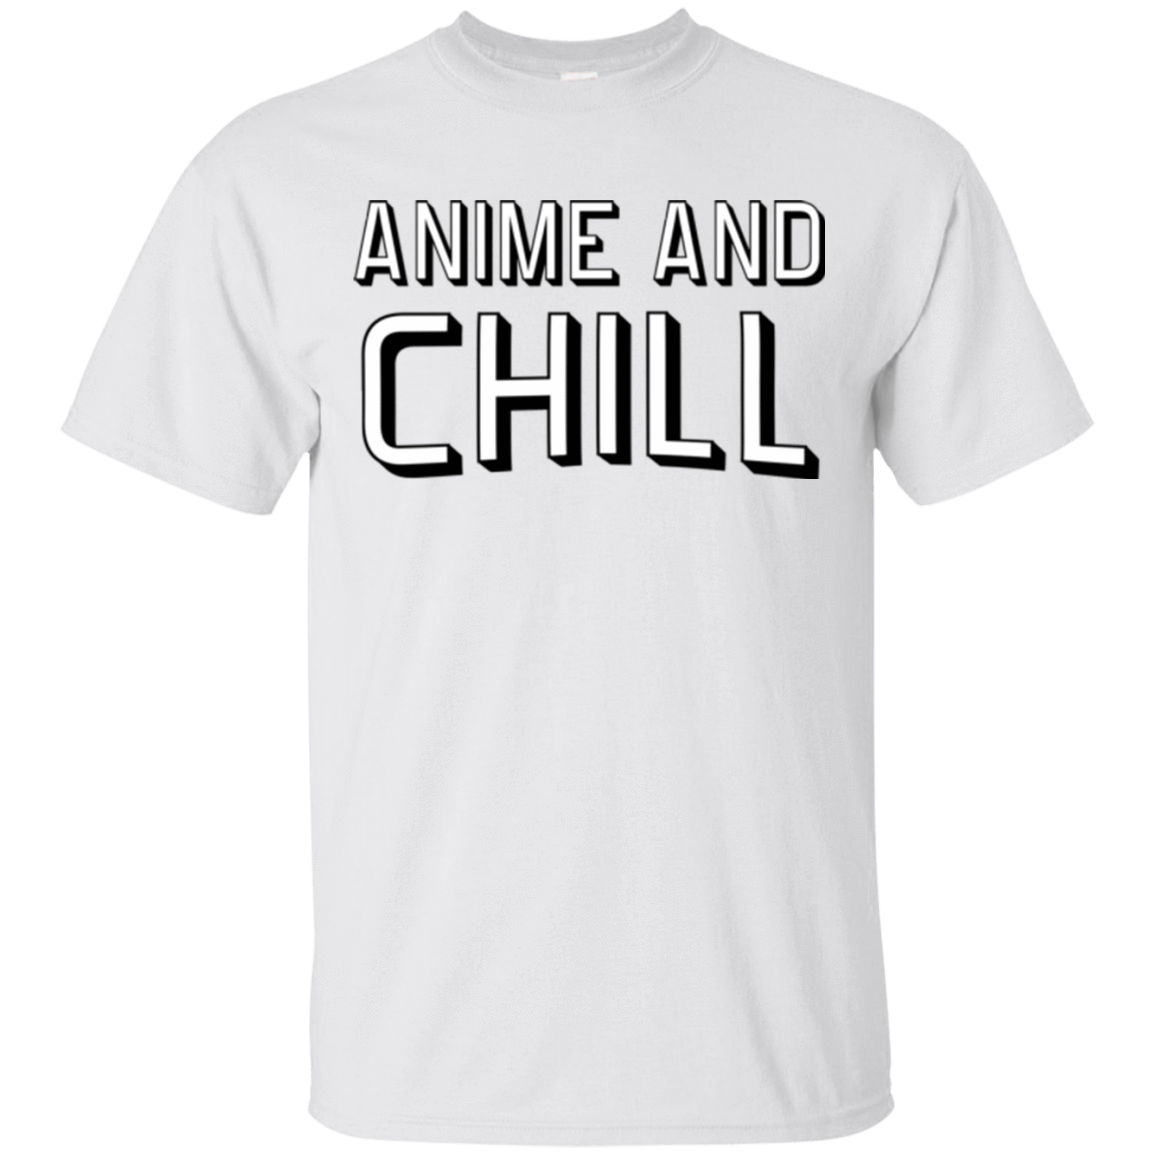 T-Shirts White / Small Anime and chill T-Shirt